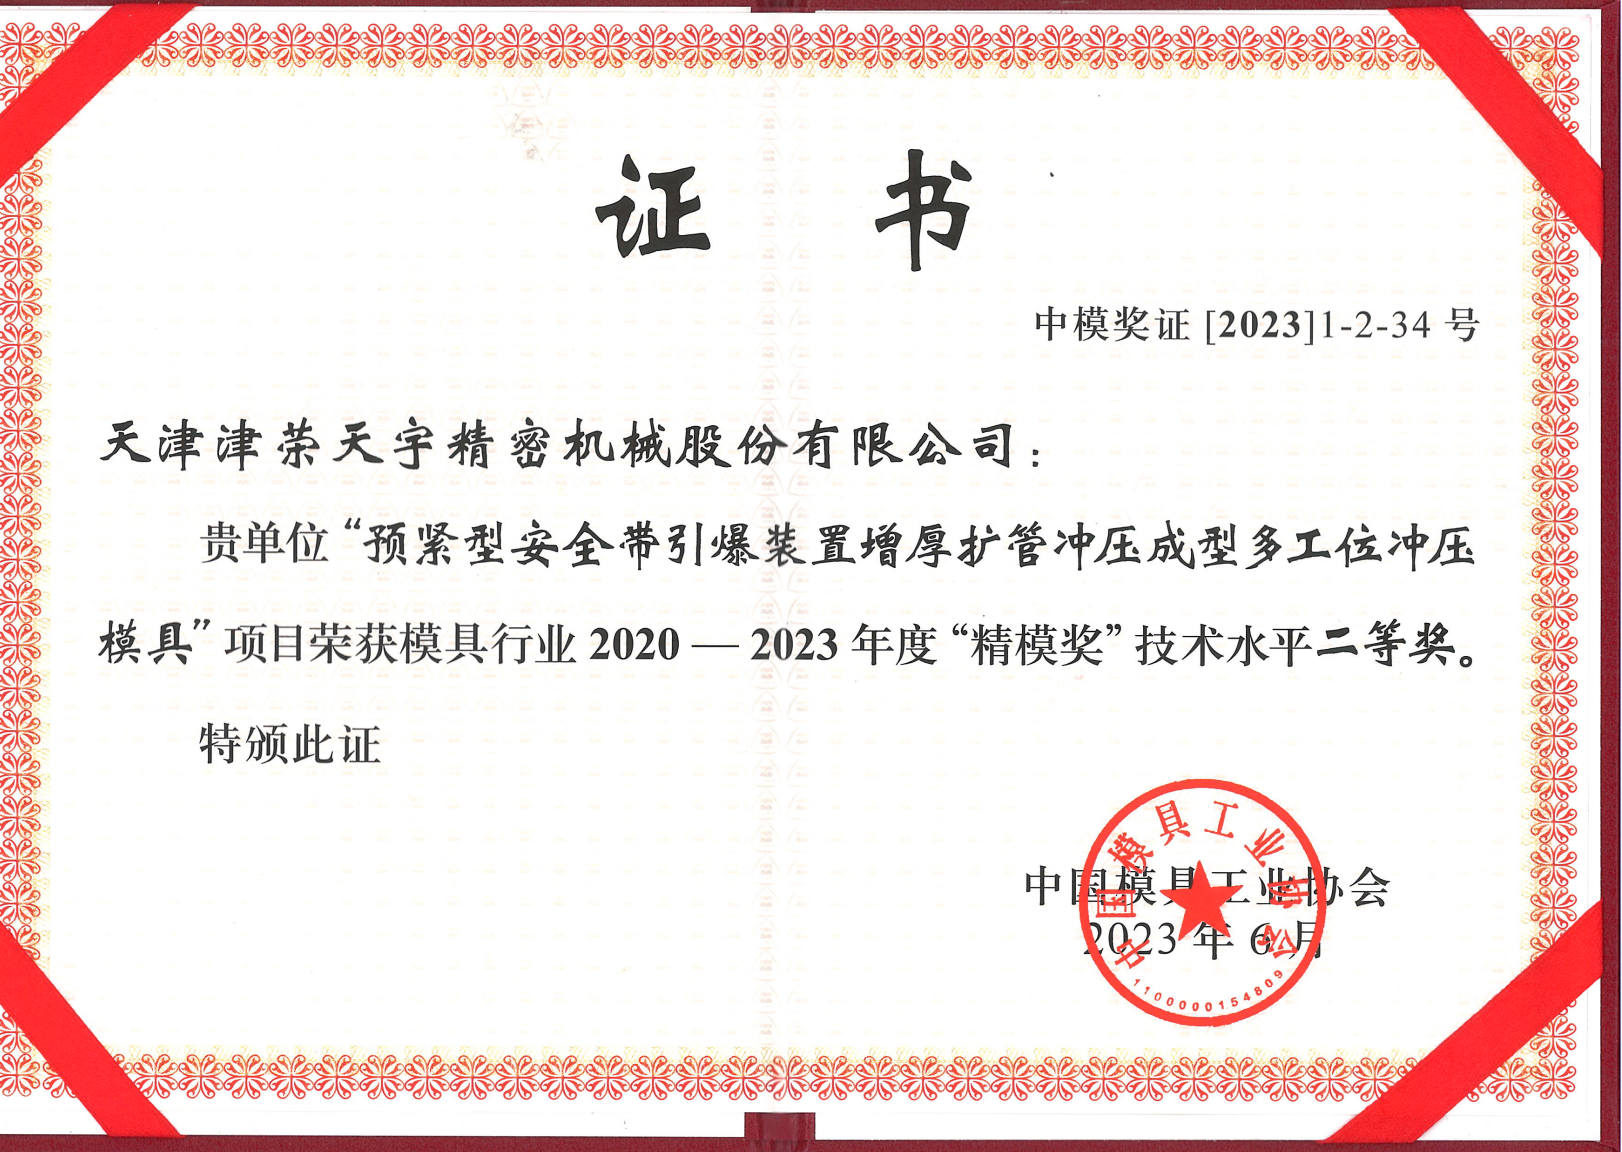 Second Prize of Precision Mold Award for Multi Station Stamping Mold for Thickening and Expanding Tube Stamping of Pre tensioned Seat Belt Detonation Device